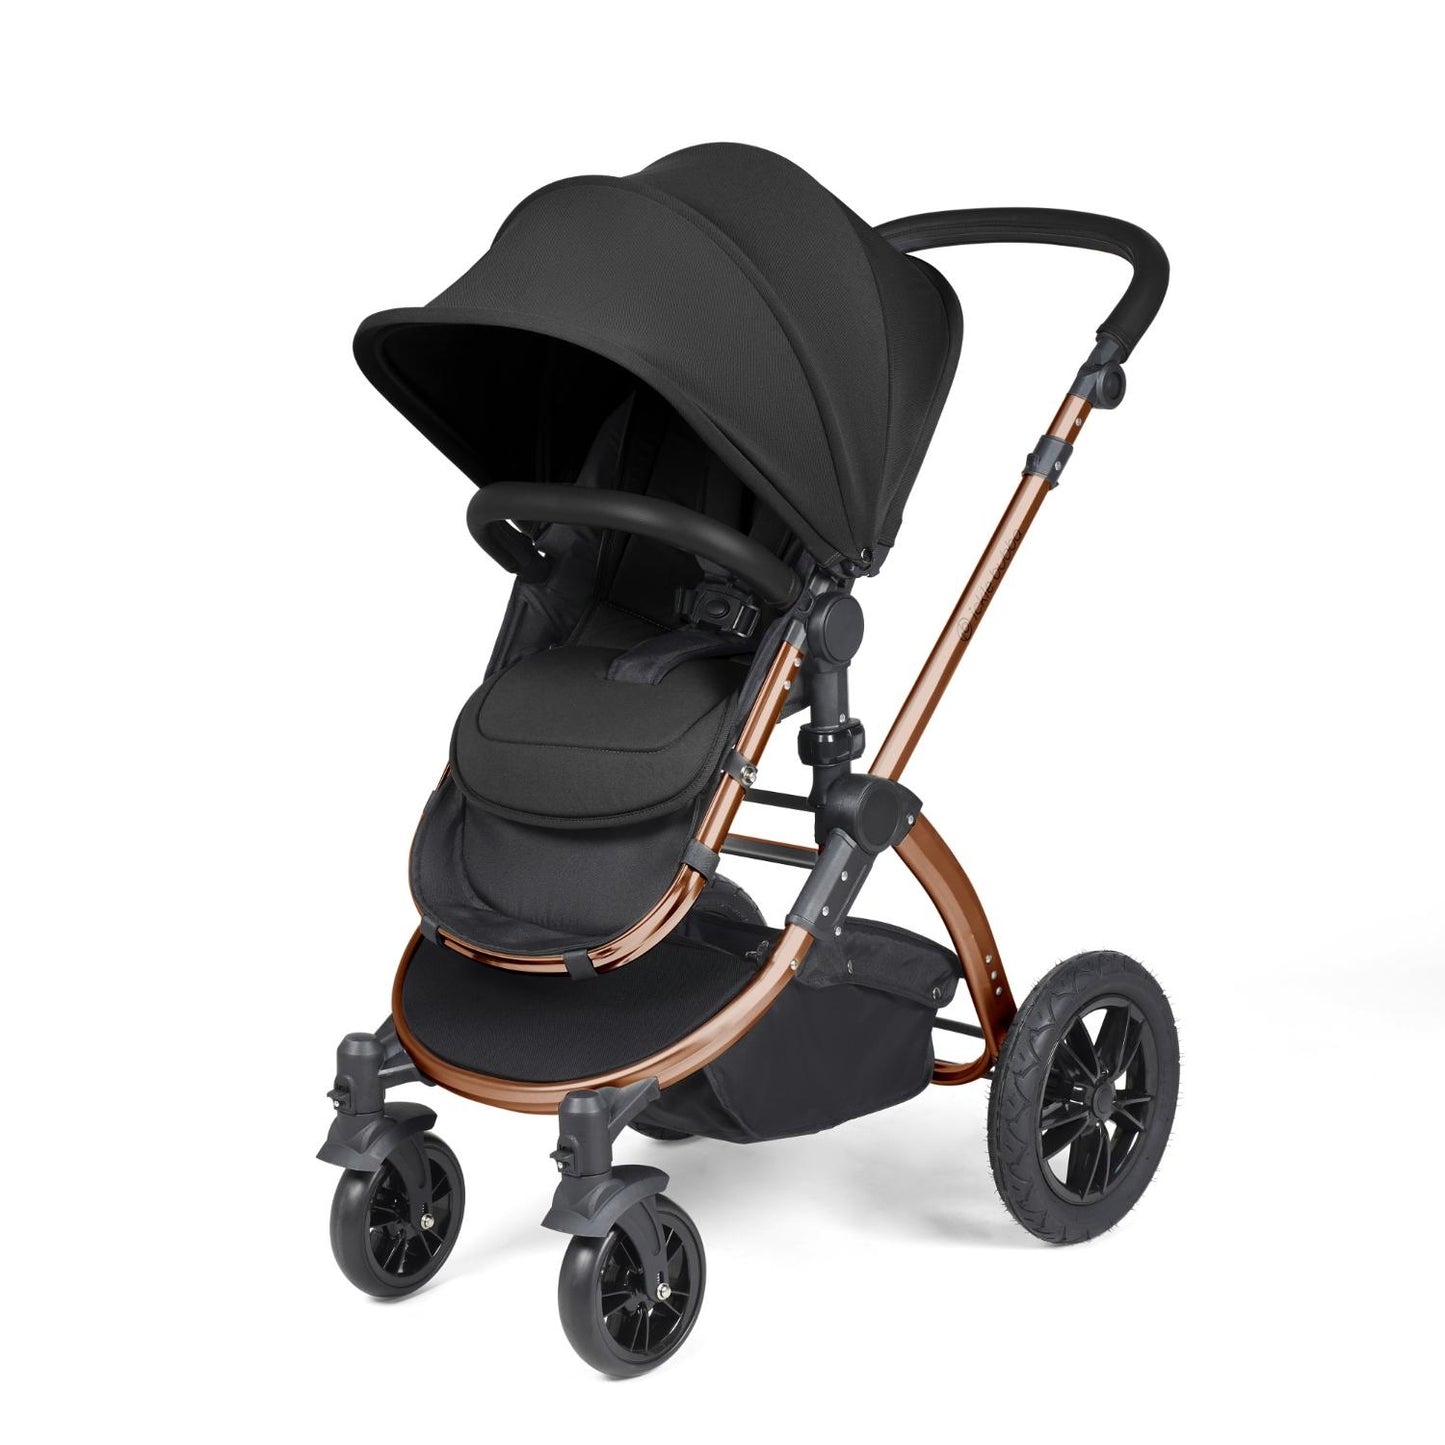 Ickle Bubba Stomp Luxe Pushchair with seat unit attached in Midnight black colour with bronze chassis